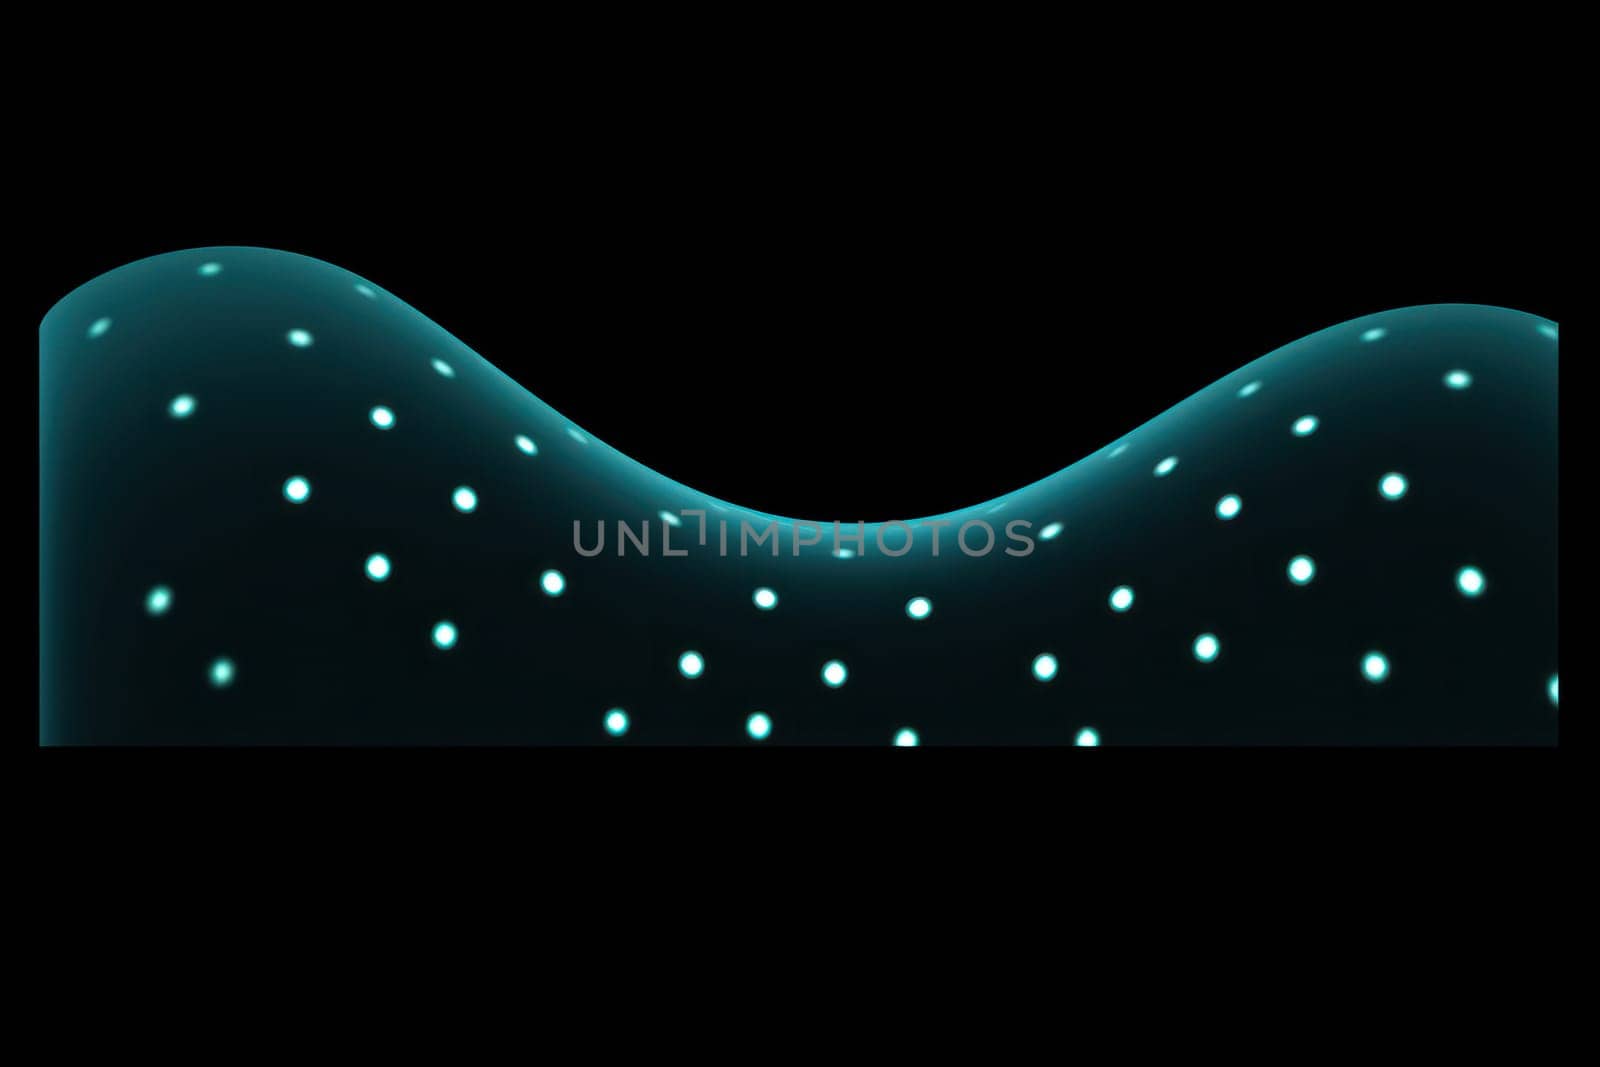 Abstract Light: Futuristic Blue Wave - A Digital Design Illustration with Graphic Curve.